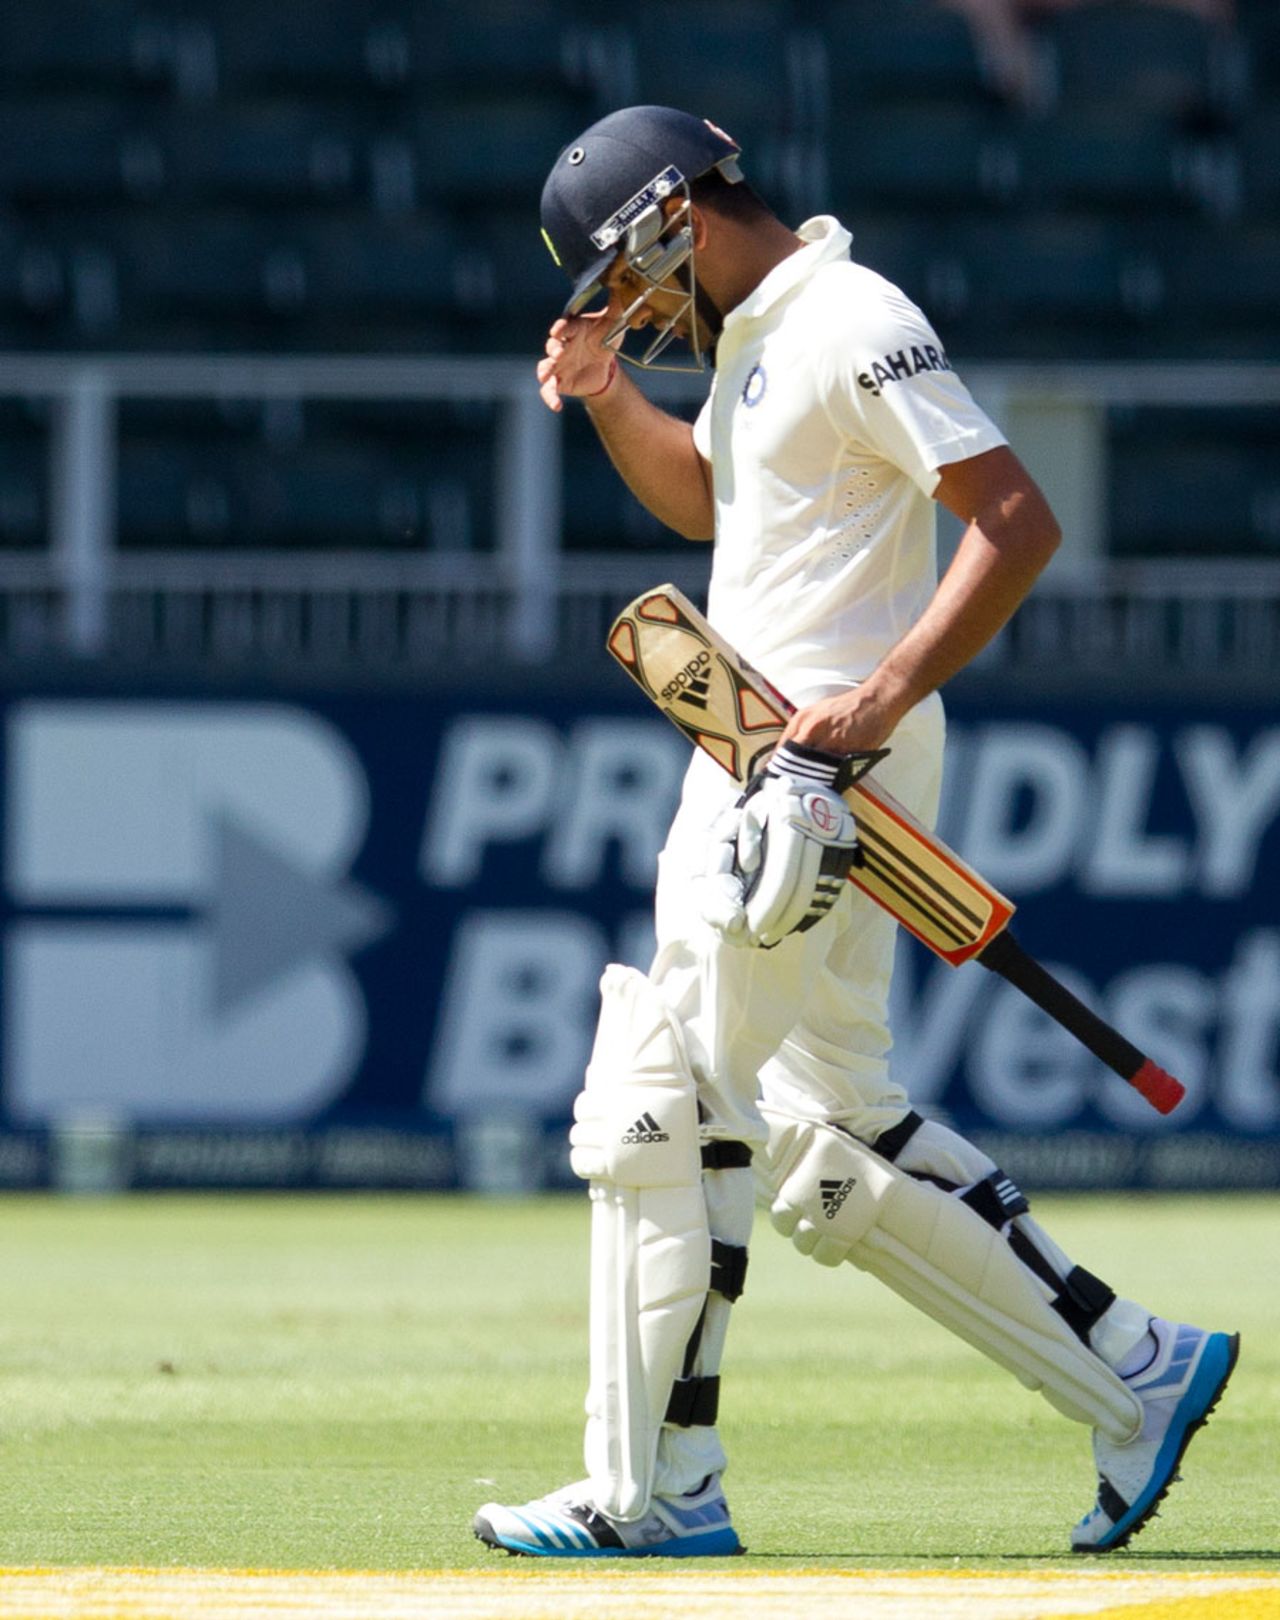 Rohit Sharma got out to a poor shot outside off stump, South Africa v India, 1st Test, Johannesburg, 1st day, December 18, 2013